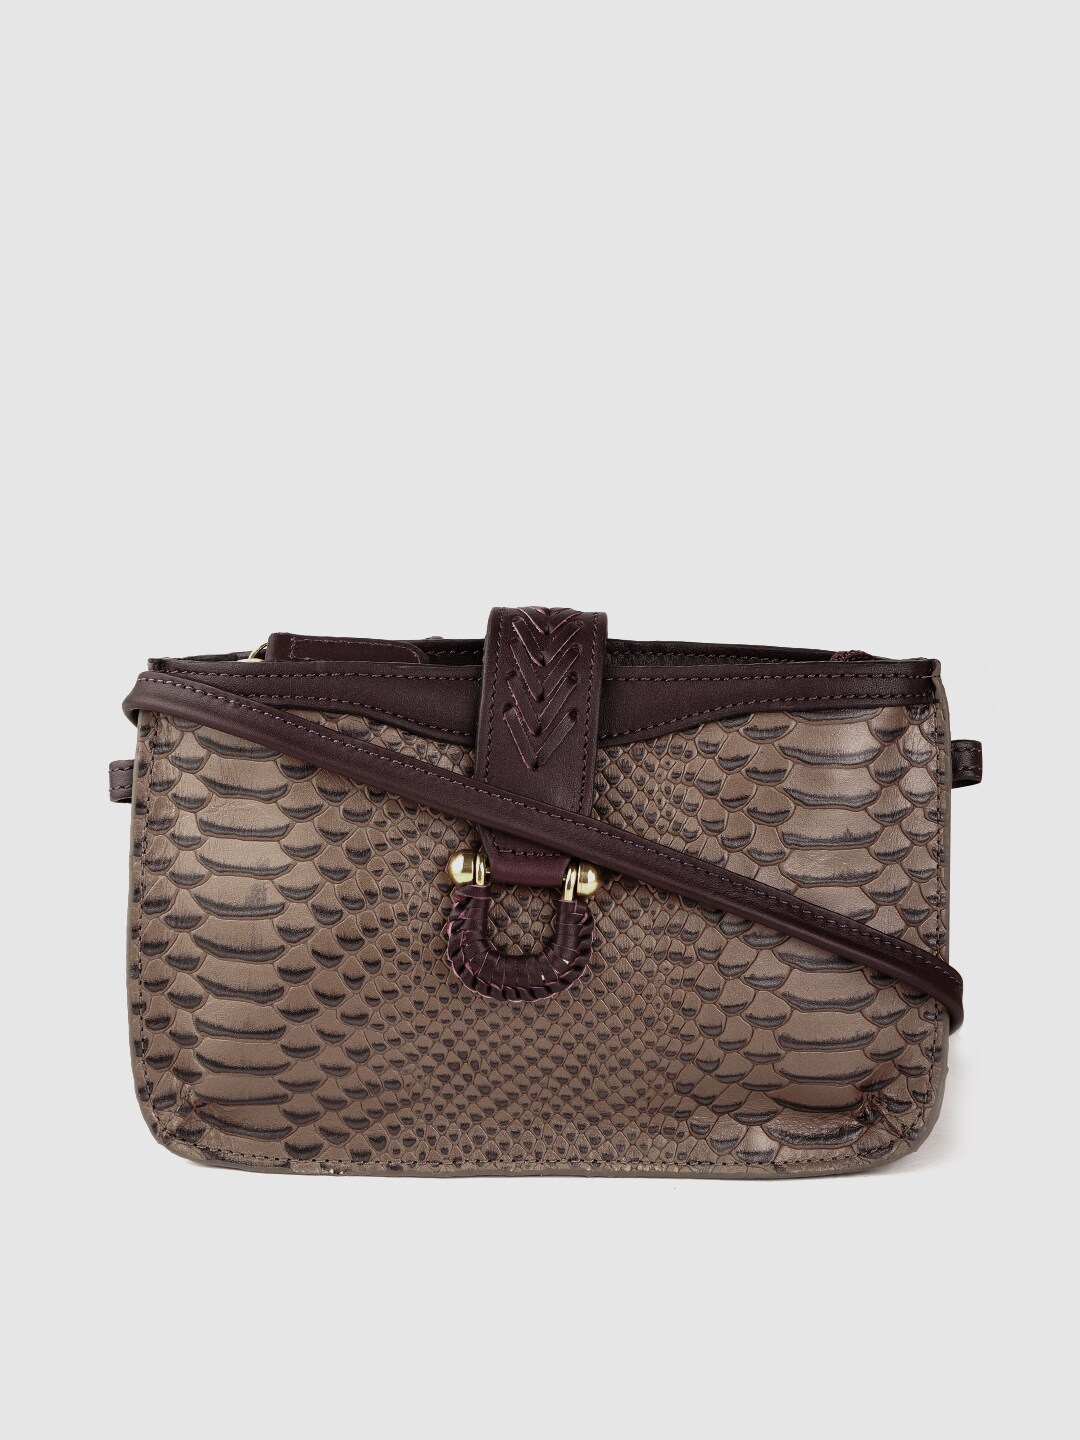 Hidesign Brown & Burgundy Snakeskin Textured Leather Structured Sling Bag Price in India